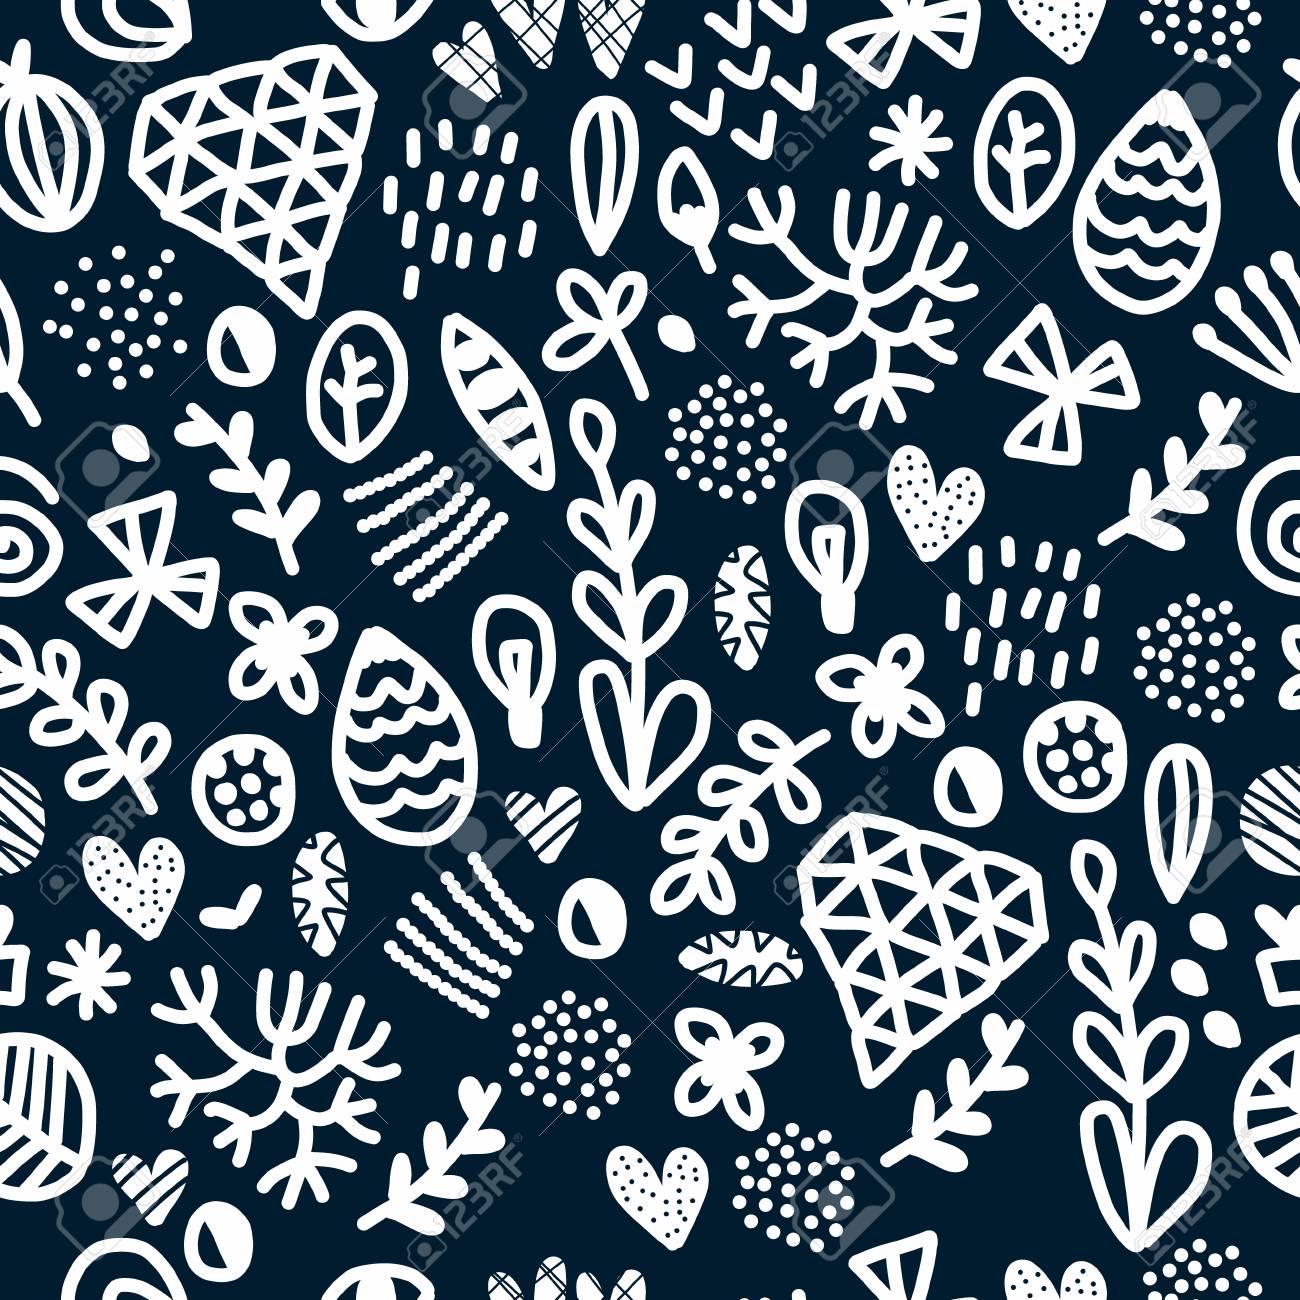 Vector Seamless Repeating Wallpaper With Figures Illustration